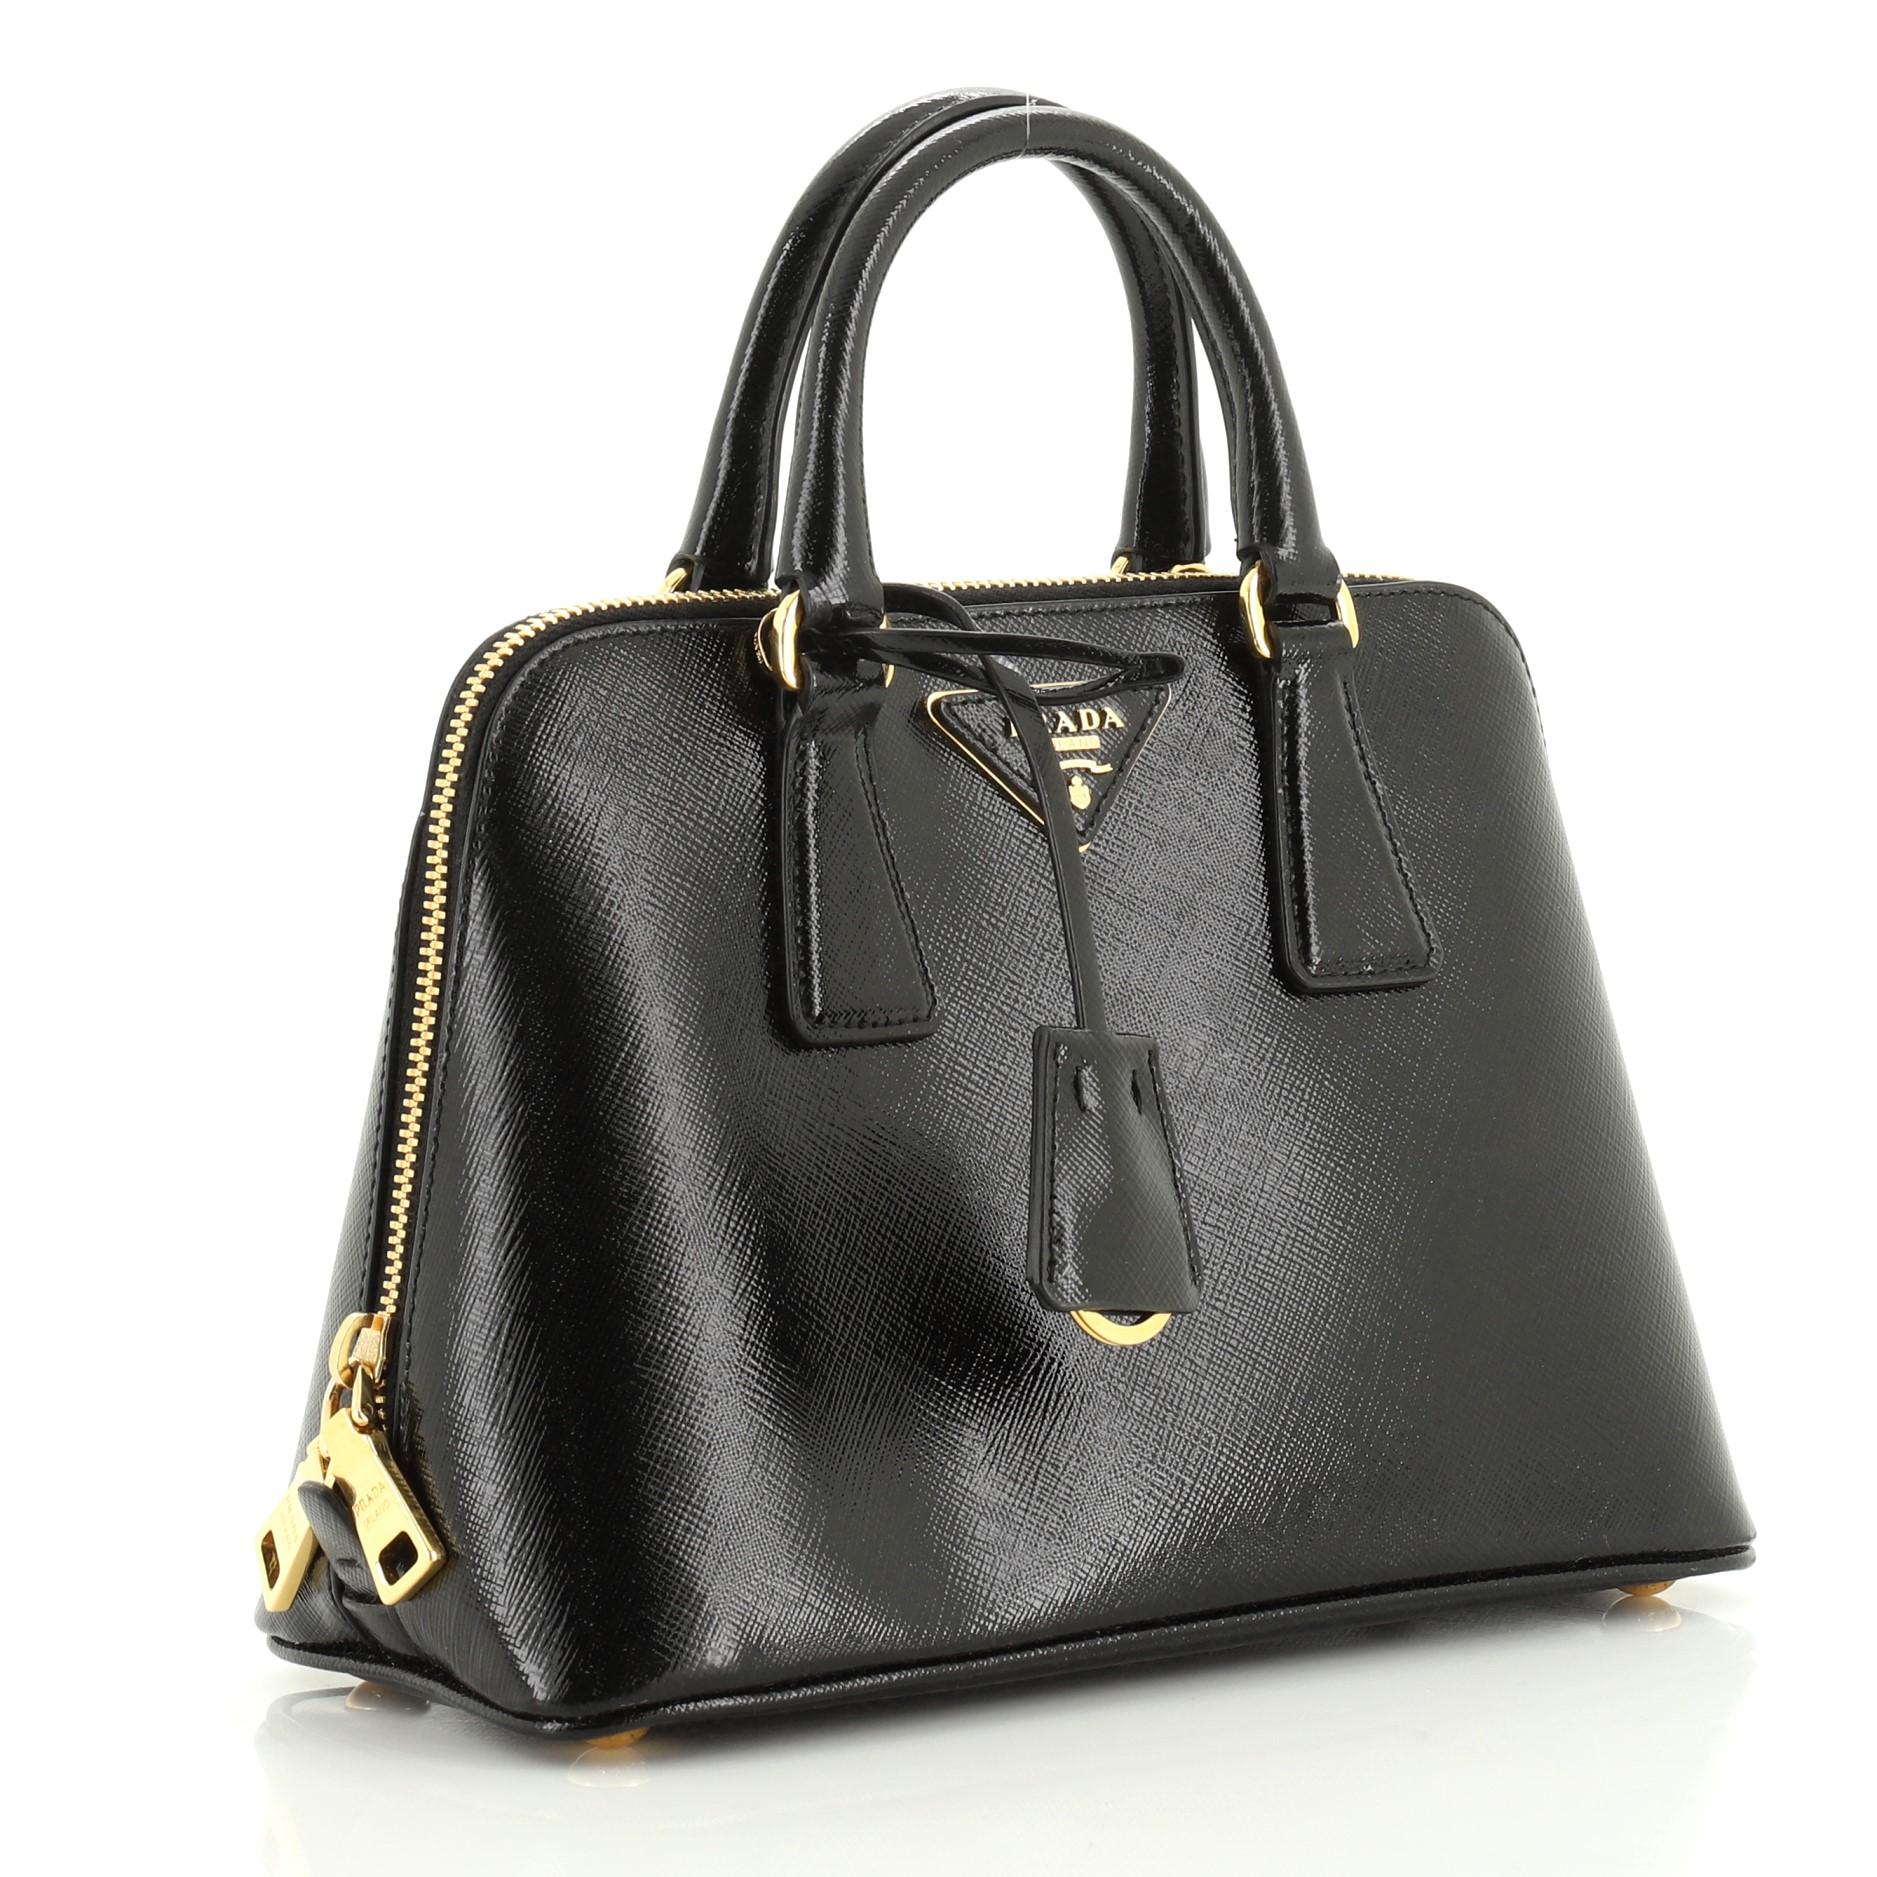 This Prada Promenade Bag Vernice Saffiano Leather Small, crafted from black vernice saffiano leather, features dual rolled handles, triangle Prada logo, and gold-tone hardware. Its two-way zip closure opens to a black fabric interior with a center